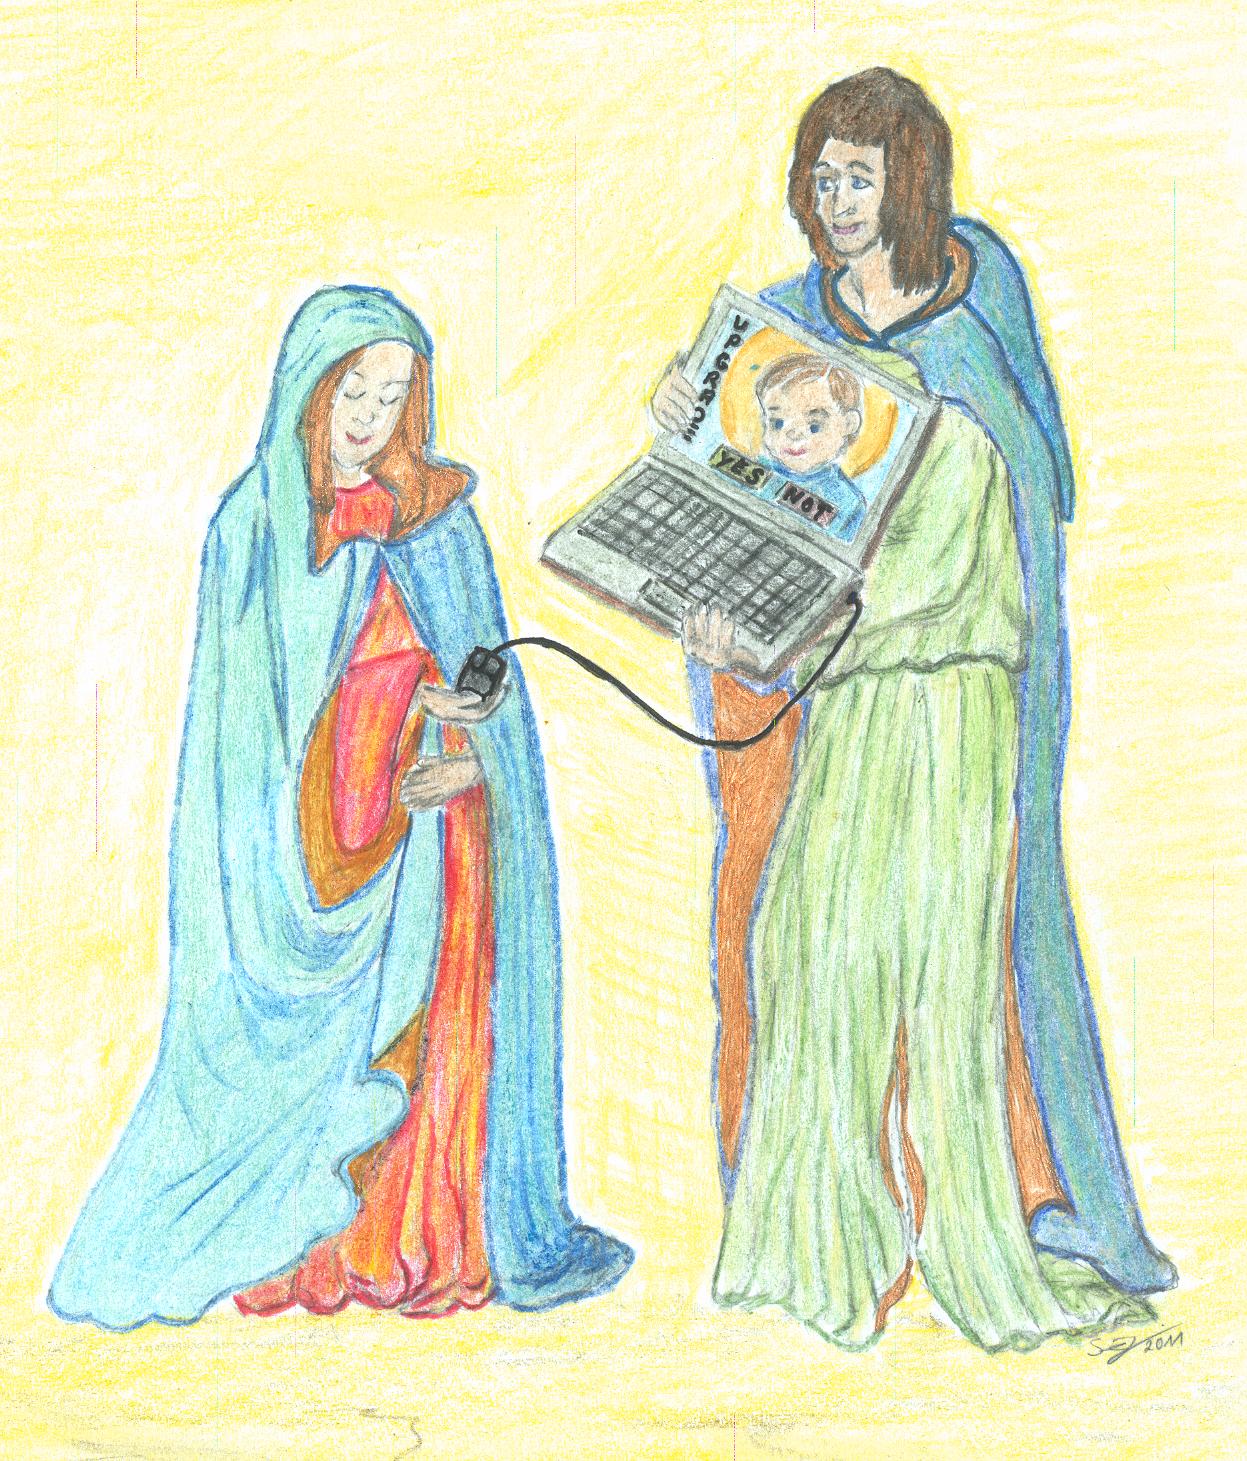 The Christ Child: A Plug and Play Upgrade for Humanity